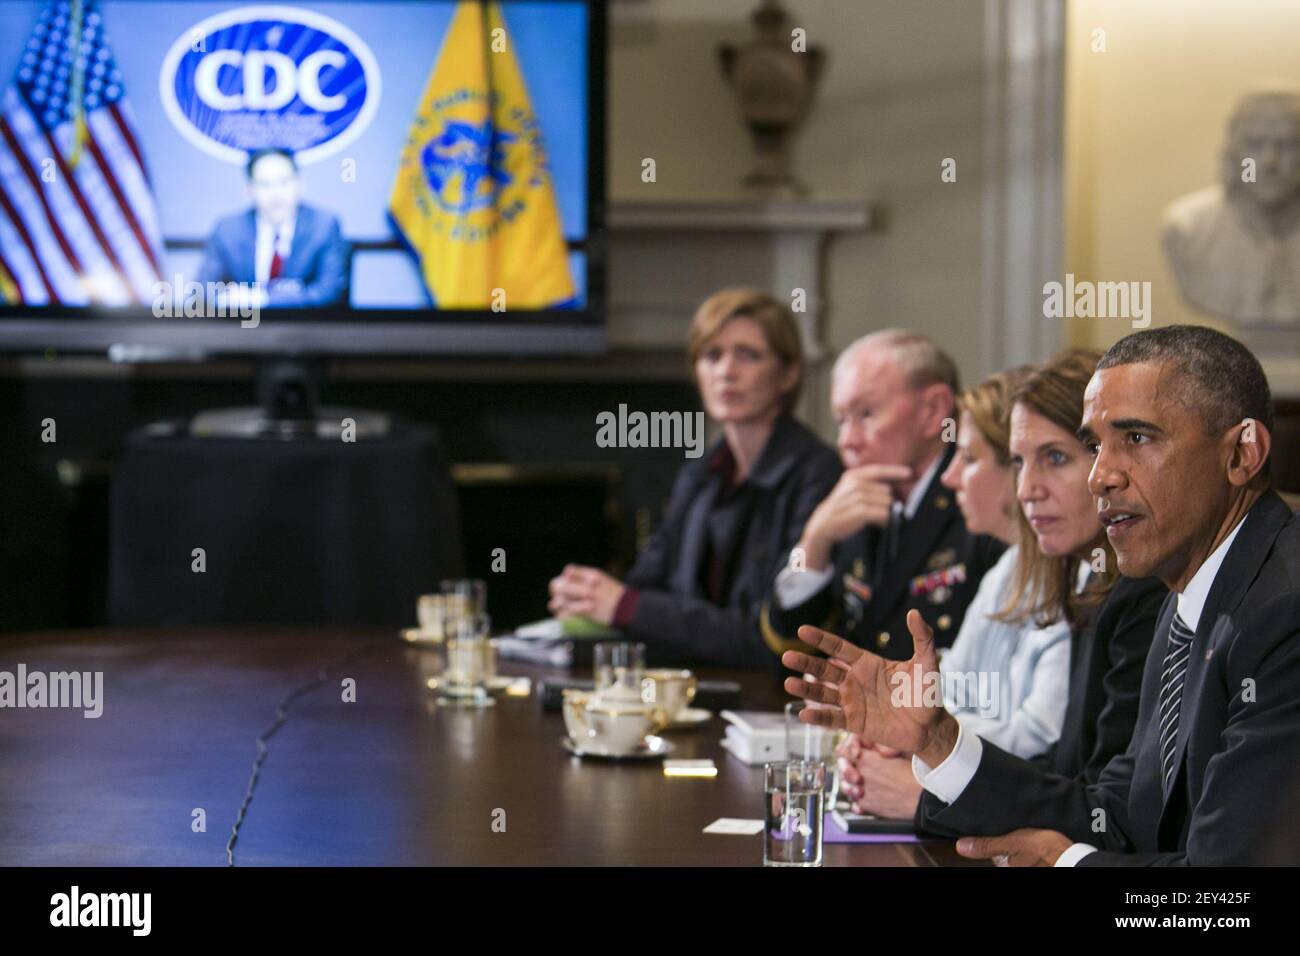 President Barack Obama delivers remarks during a cabinet level meeting on the United States government response to the Ebola epidemic in the Cabinet Room of the White House Washington, D.C., on October 15, 2014. Photo Credit: Kristoffer Tripplaar/ Sipa USA Stock Photo